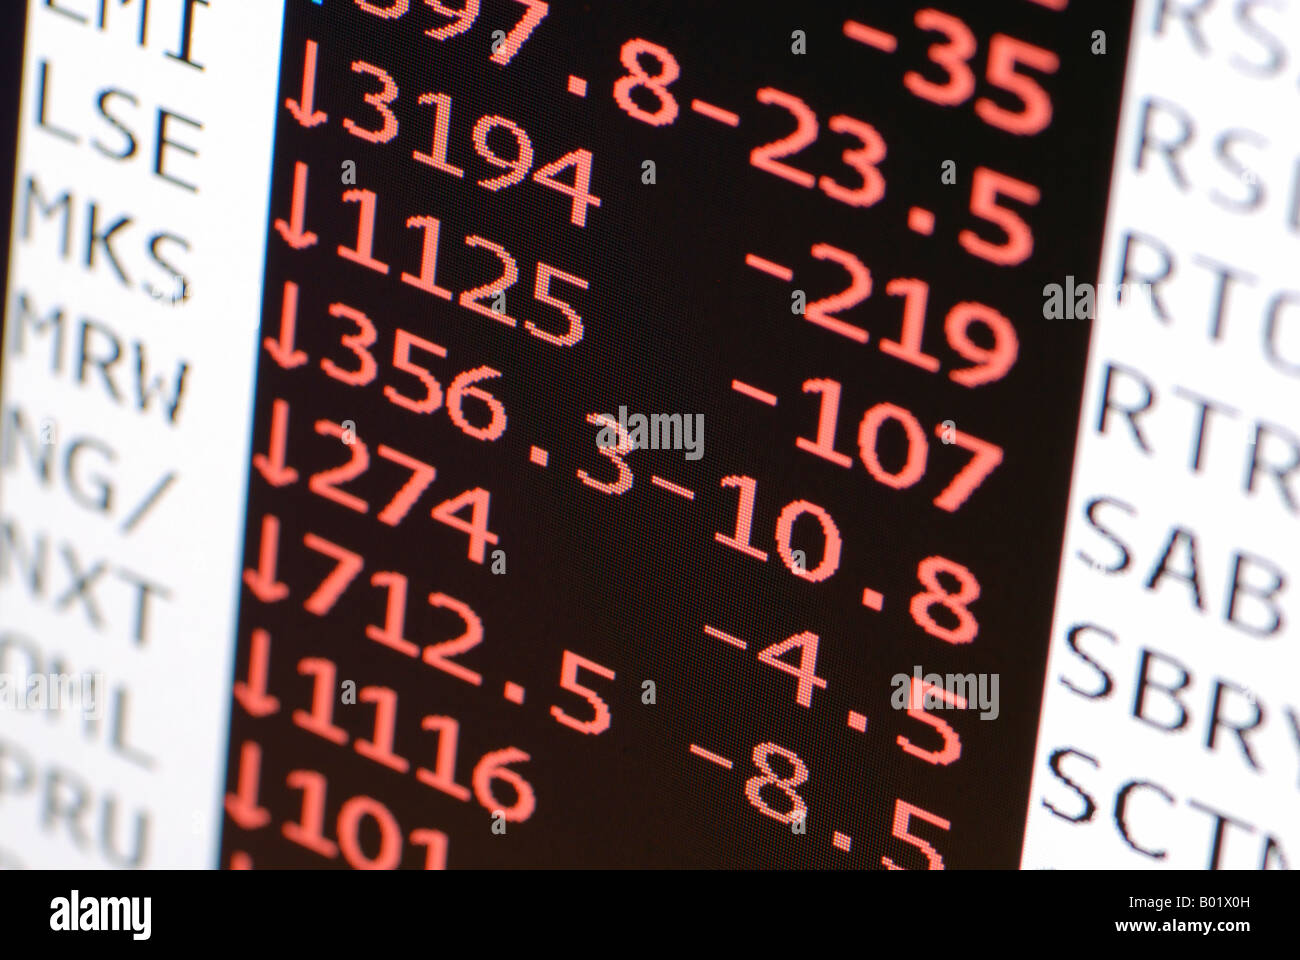 Trading screen showing sea of red Stock Photo